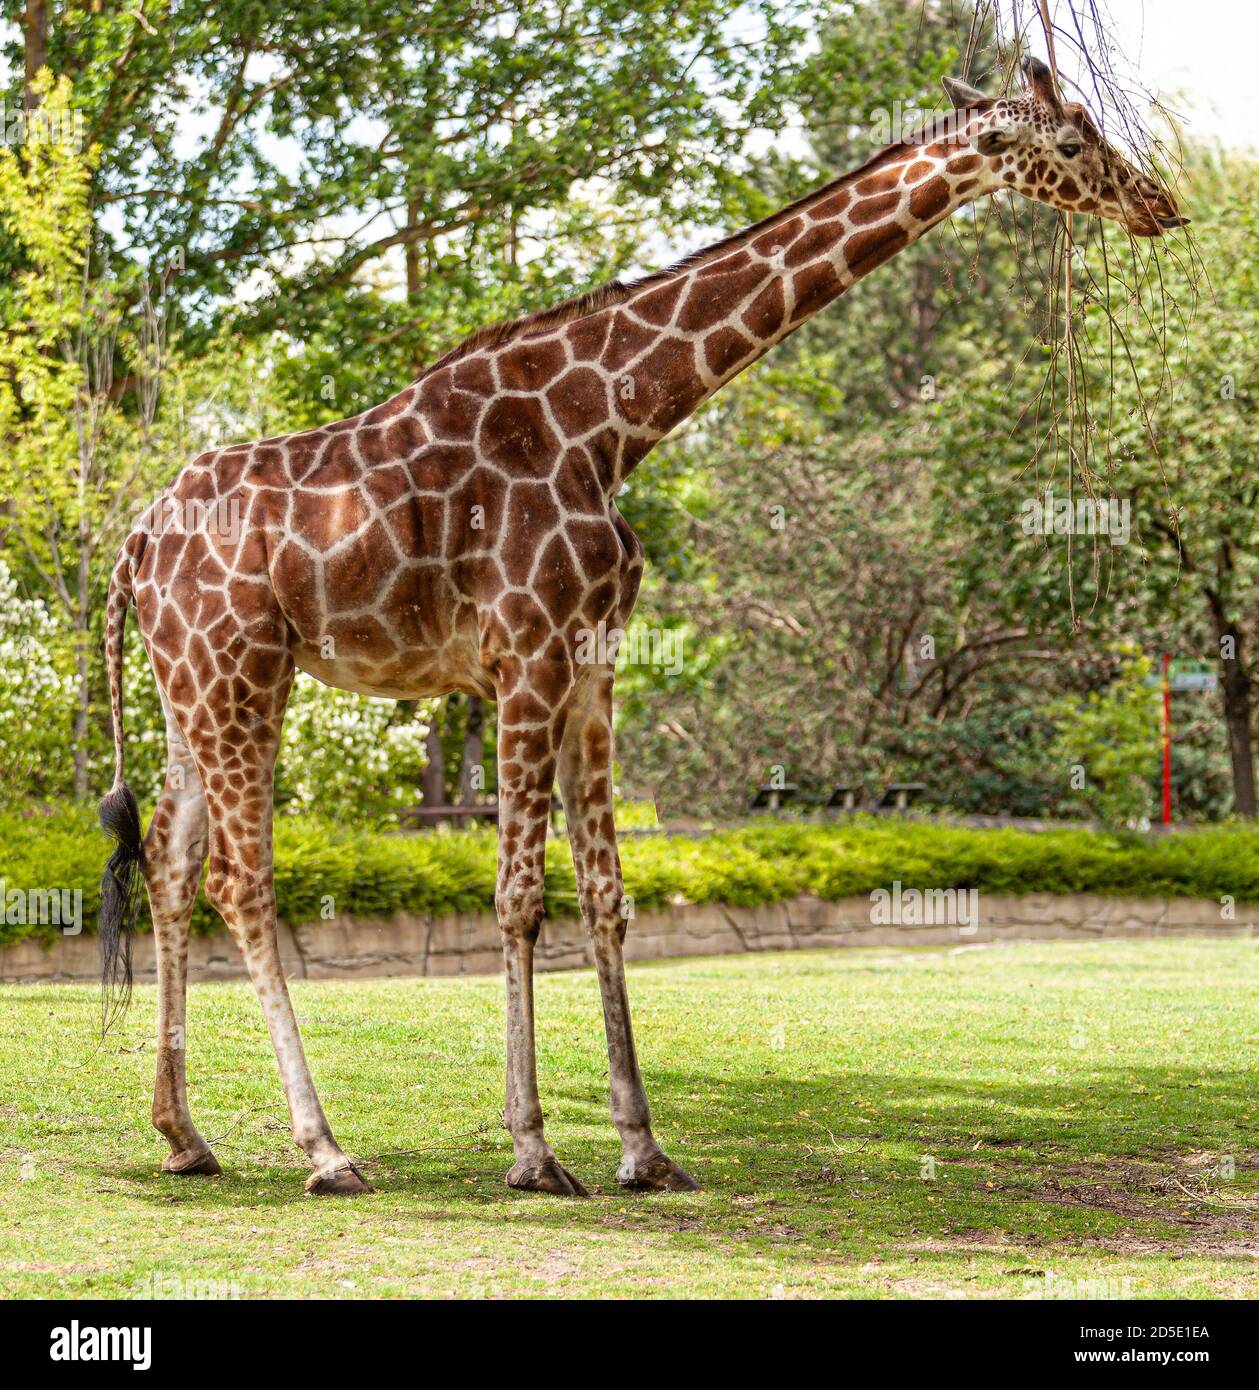 Giraffe is eating from a tree Stock Photo